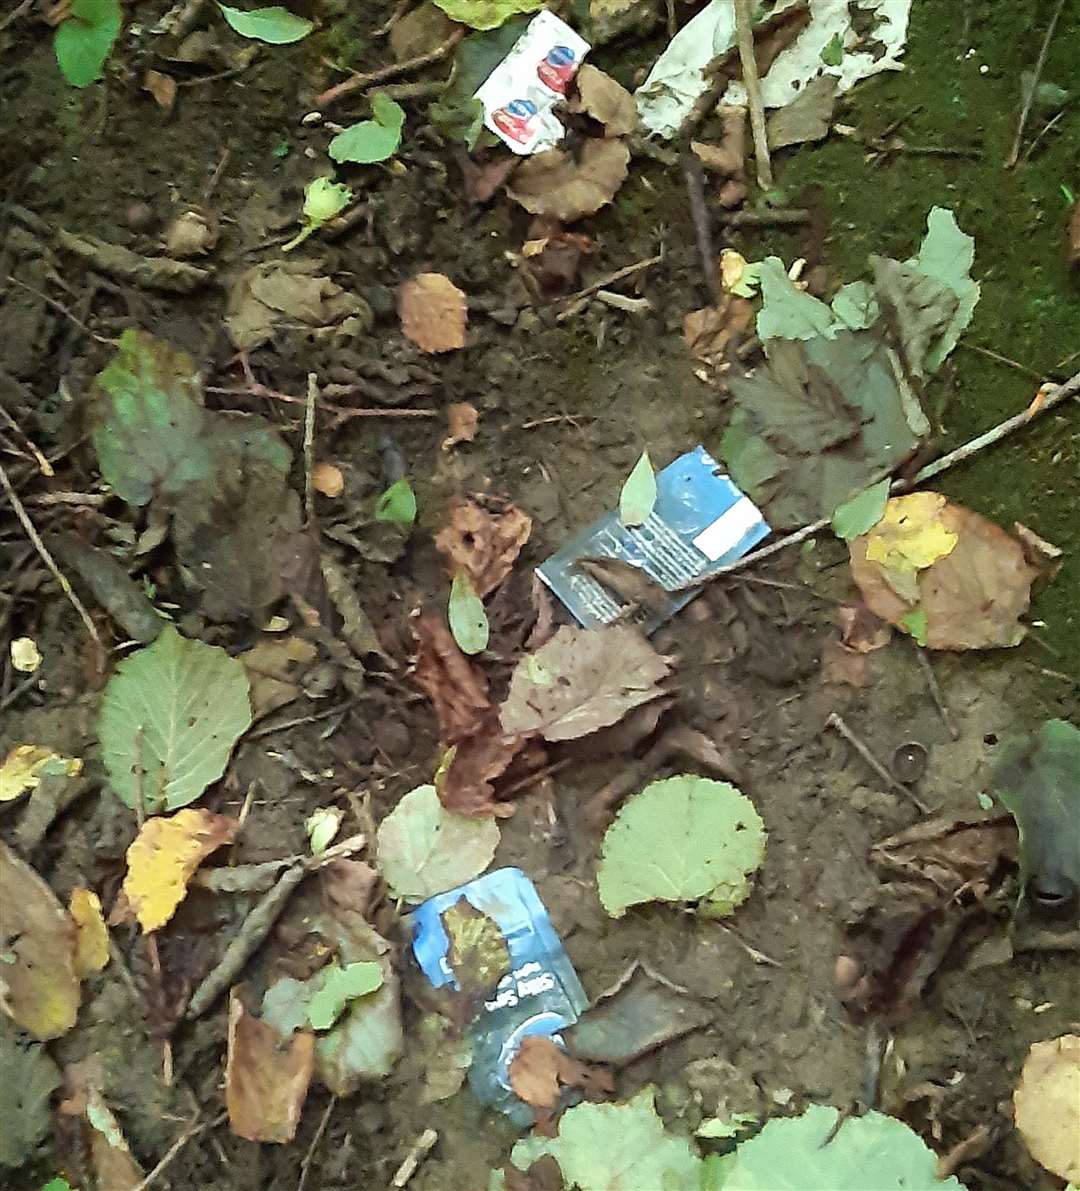 Used condoms were left strewn across the meadow